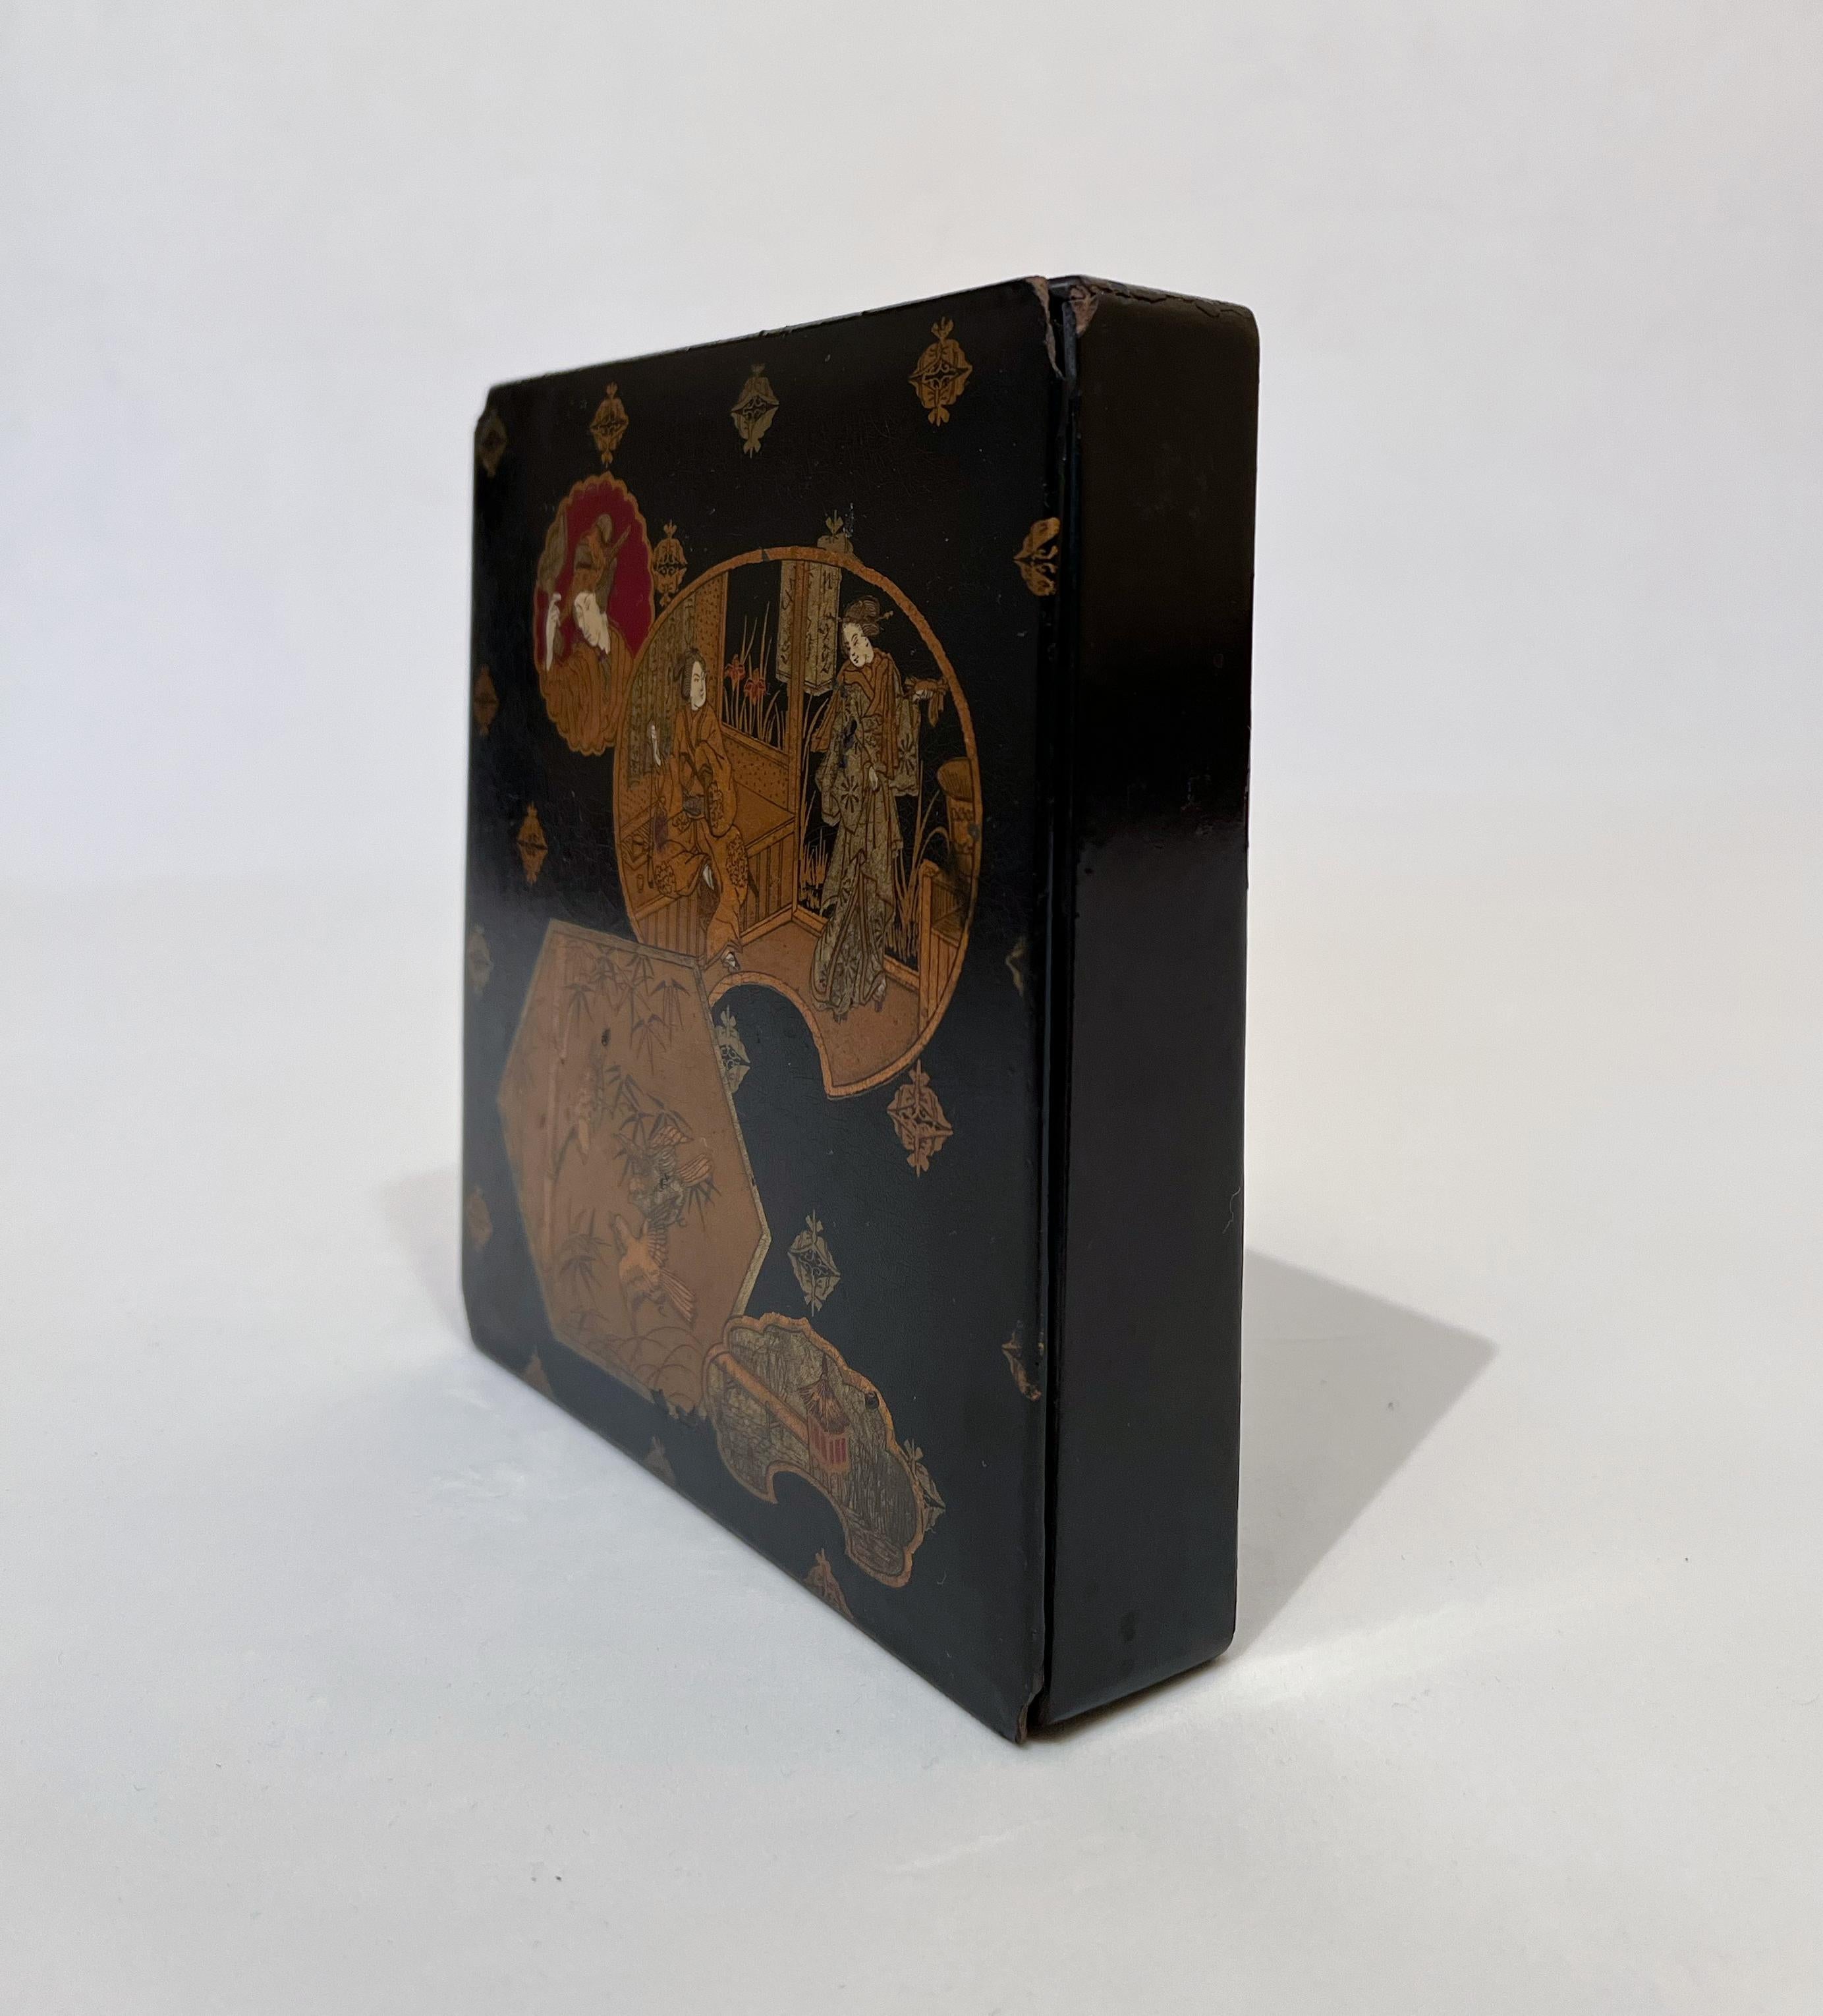 Black and gold Japanese lacquered 1900 jewellery box in perfect condition. 
Lacquer is an object made of wood, ceramic or other materials, usually domestic or sacred, coated with lacquer, which gives it a smooth, shiny surface. Lacquering of objects